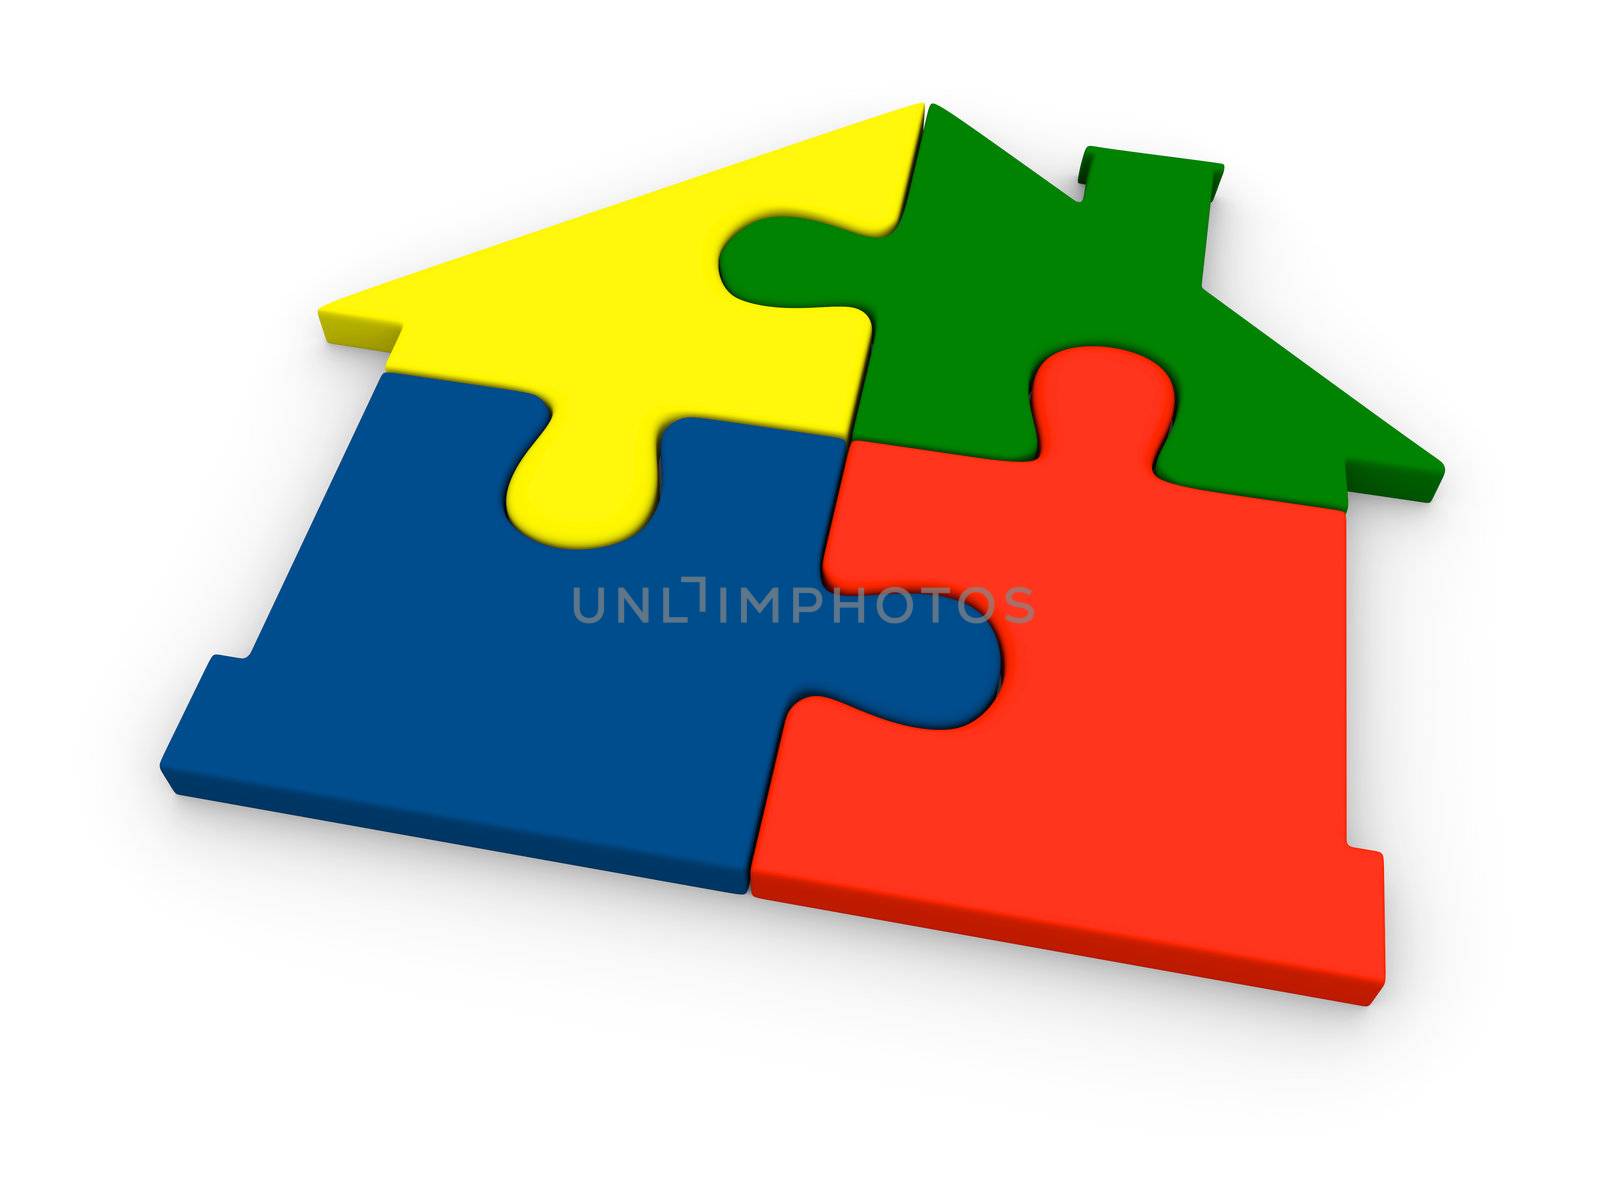 Colorful house symbol made of four colorful jigsaw pieces